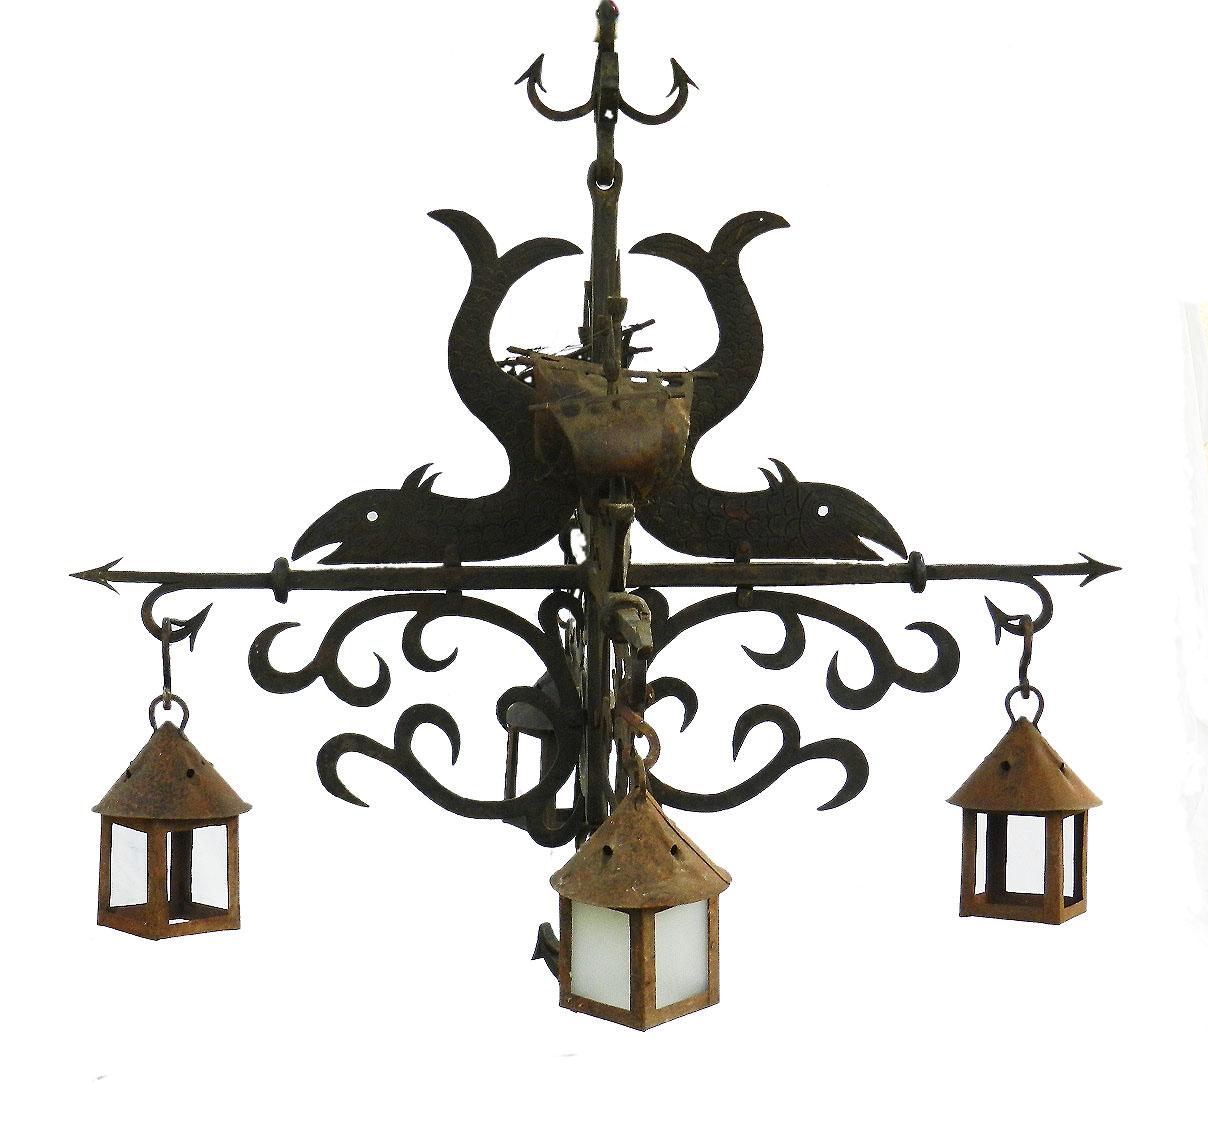 Wrought Iron Chandelier attributed to Poillerat one of a kind, circa 1930
Rare and unique
With midcentury Arts & Crafts Neo Baroque influences typical of the era
Hand forged chandelier sculpture with galleons and dolphins
Four glass and metal